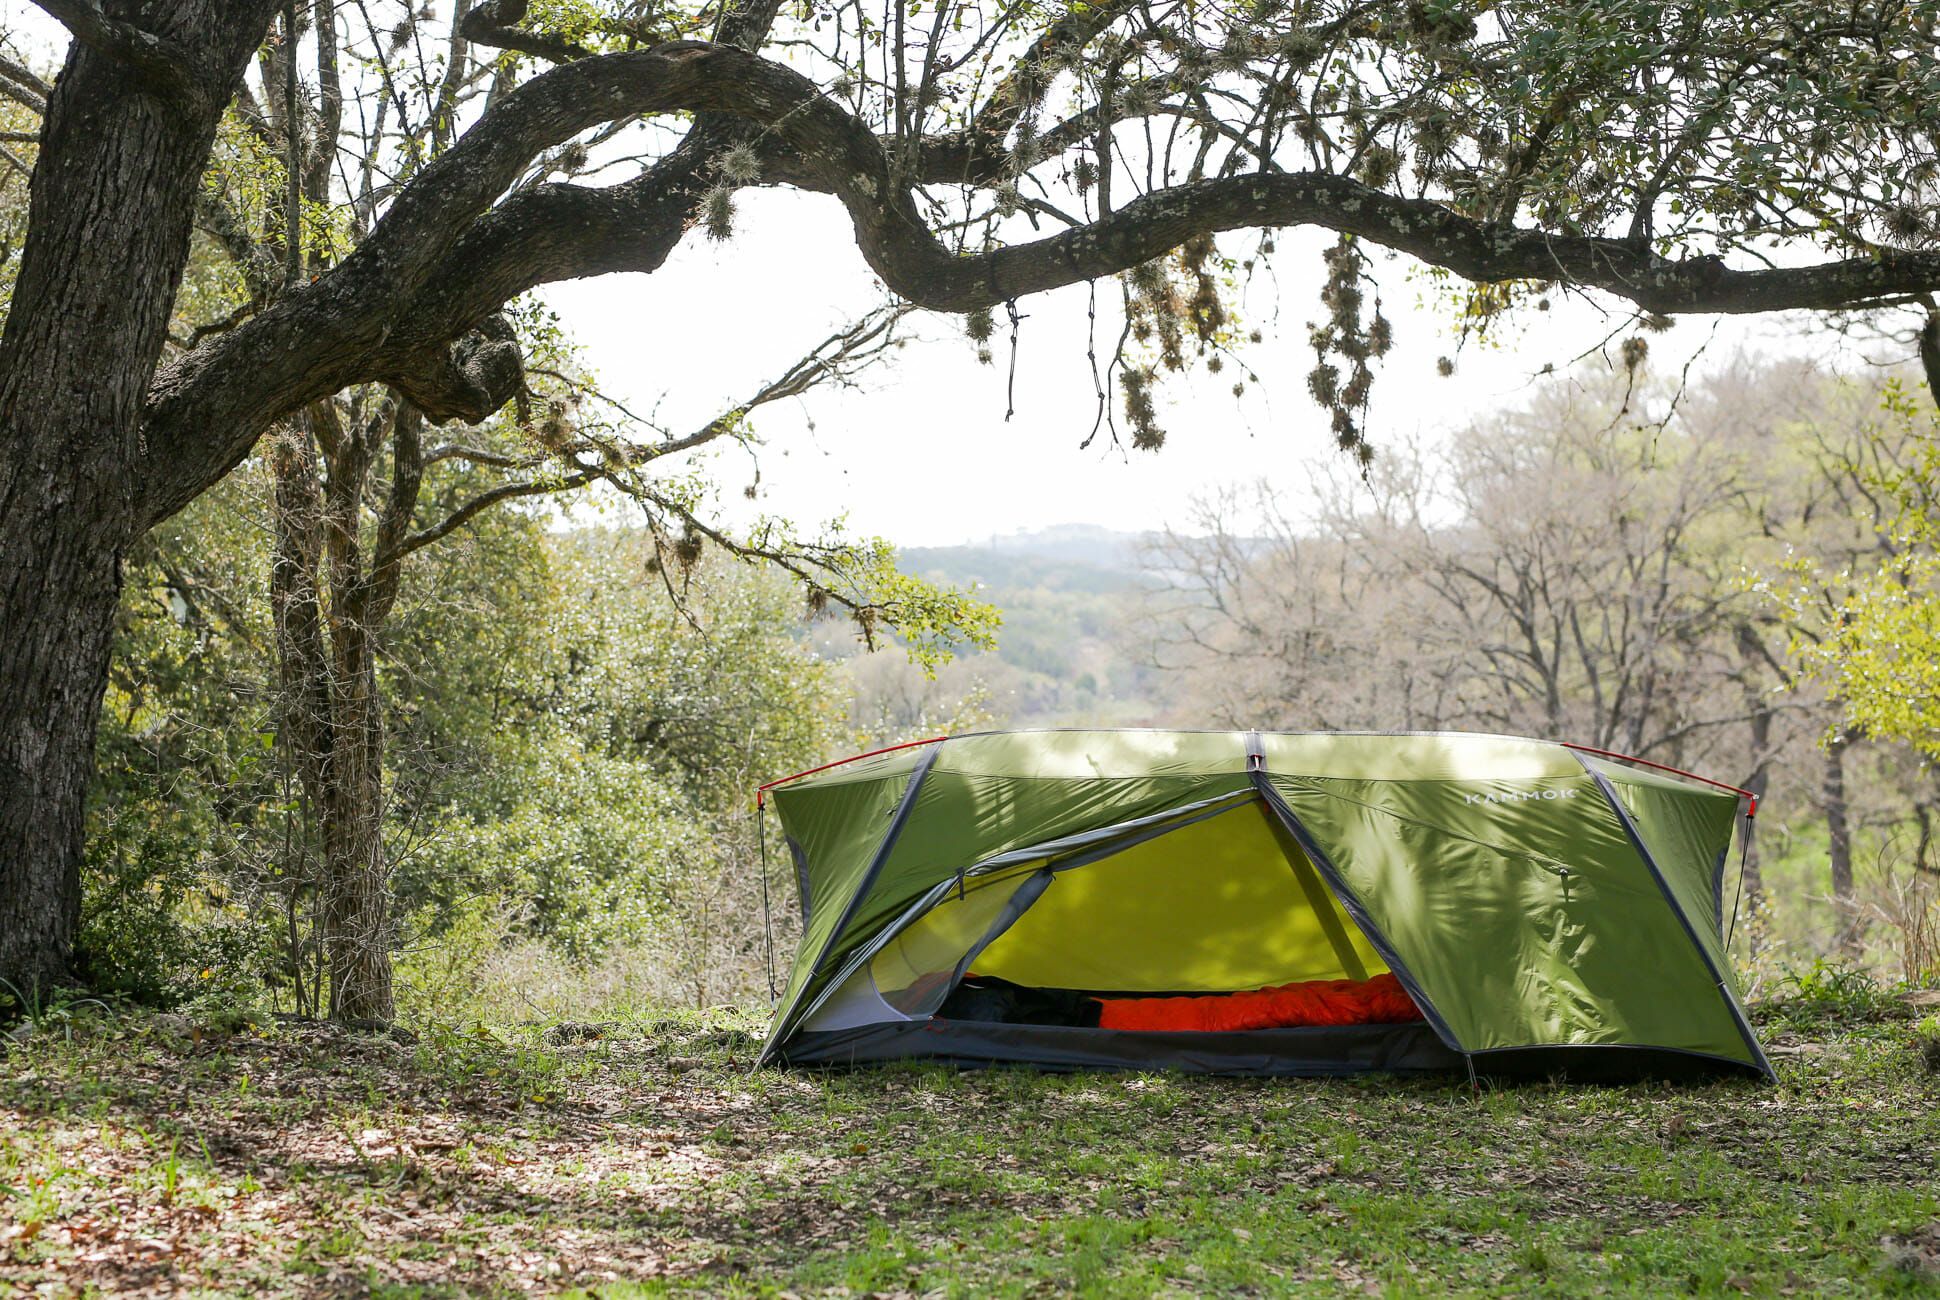 This New Tent Makes Sleeping in the Woods More Fun